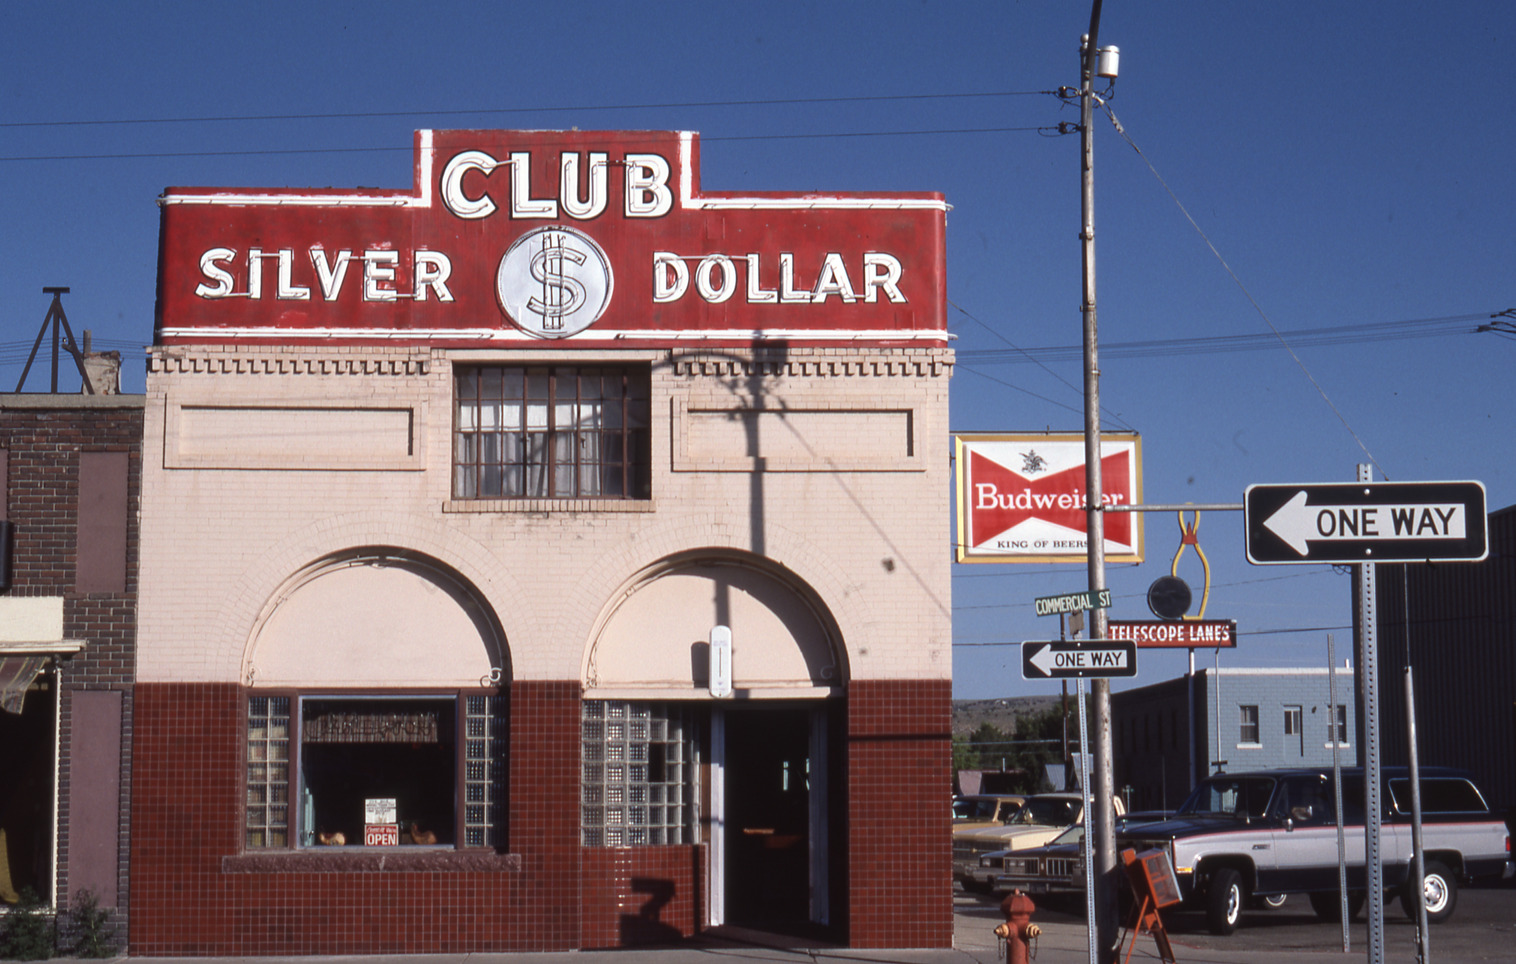 Silver Dollar Club channel letters, Elko, Nevada: photographic print